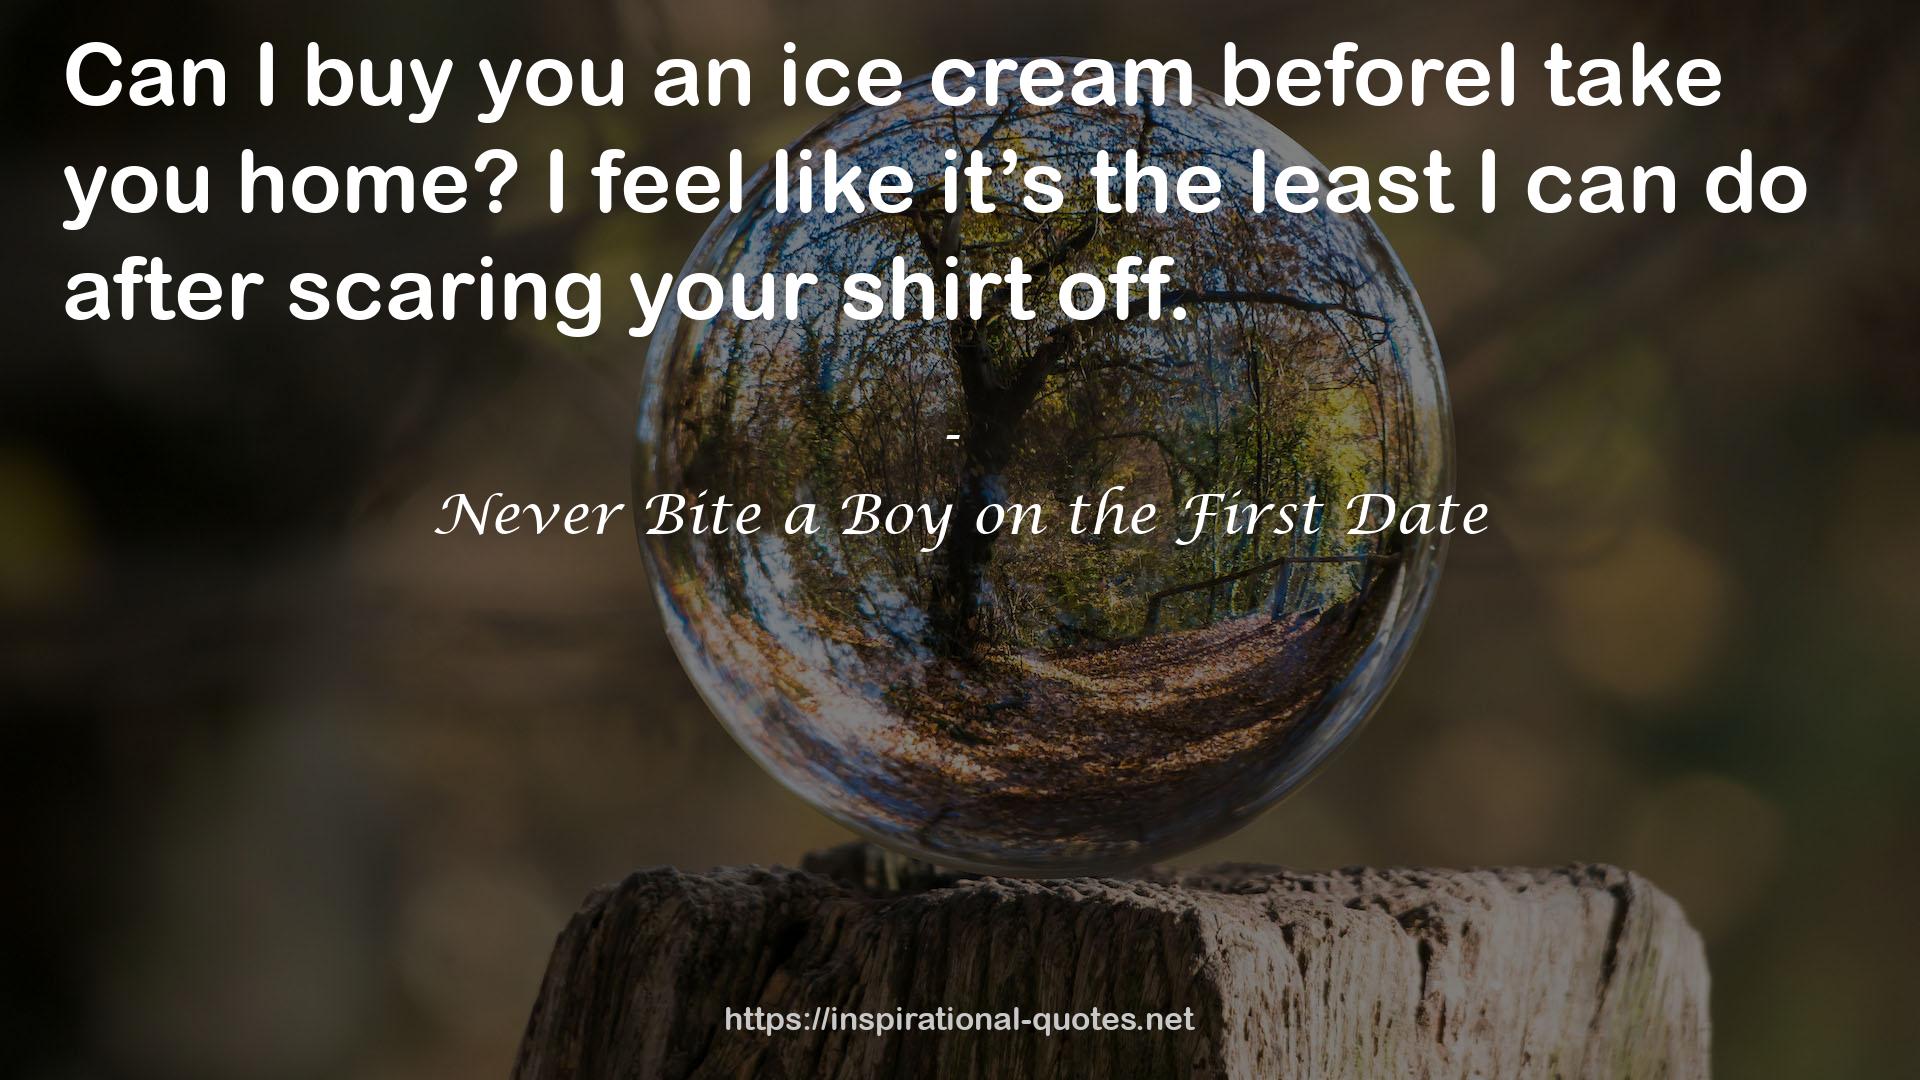 Never Bite a Boy on the First Date QUOTES